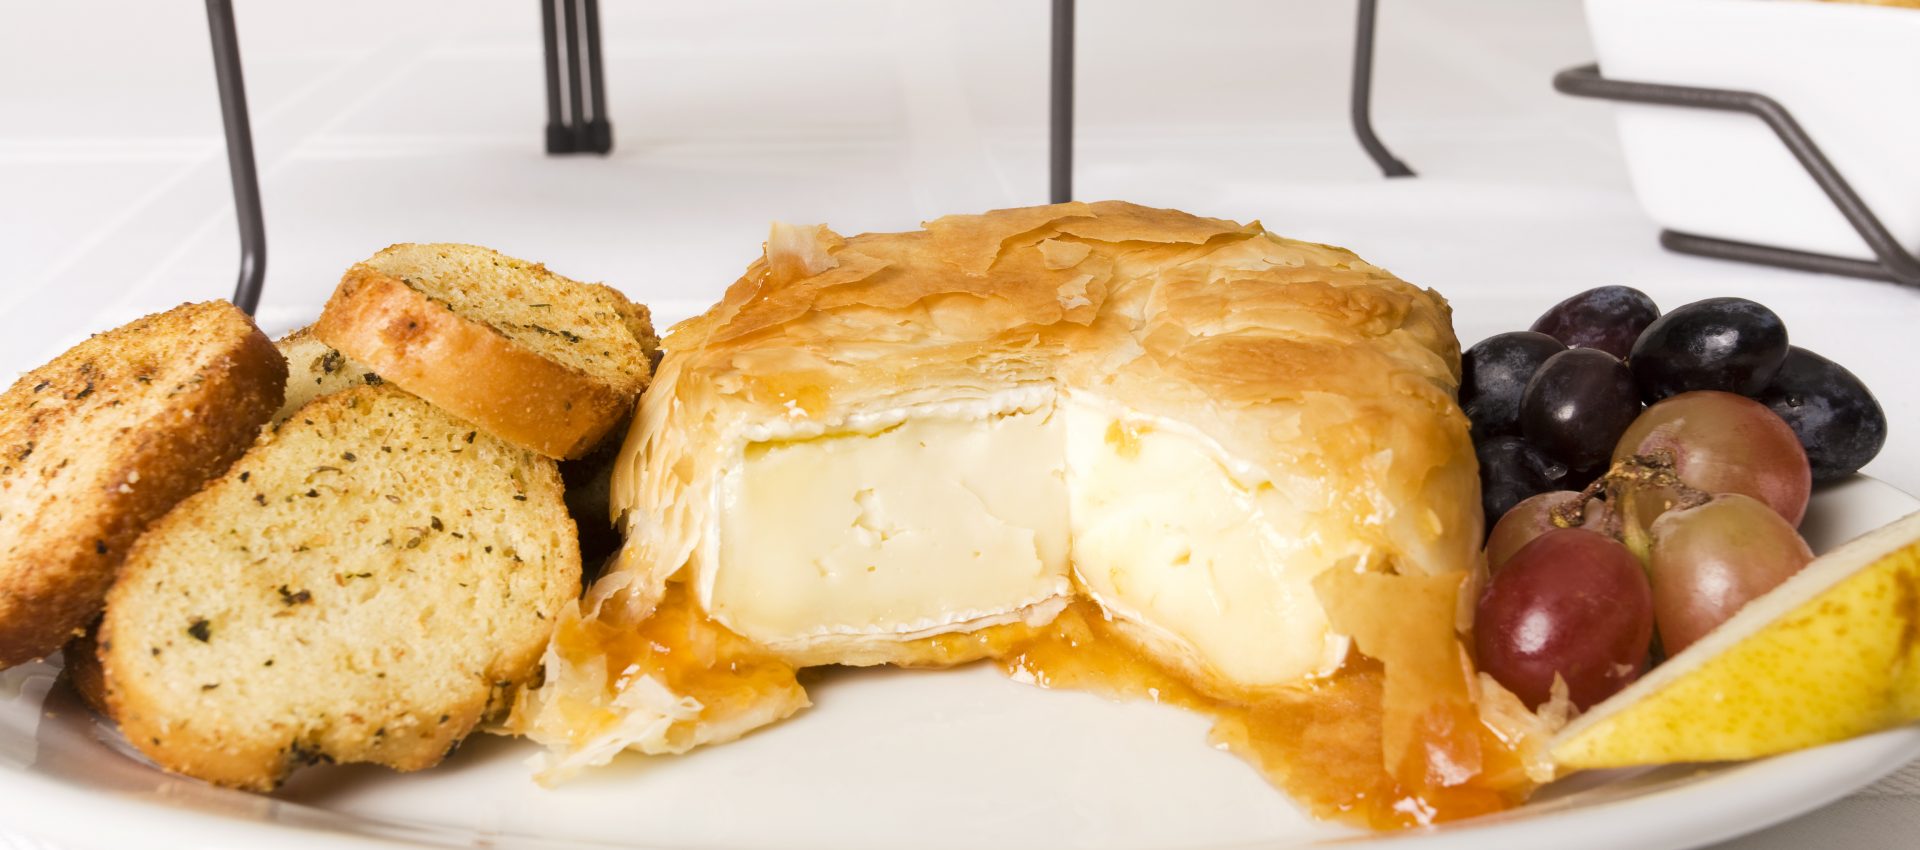 Baked Brie with Pepper Jelly